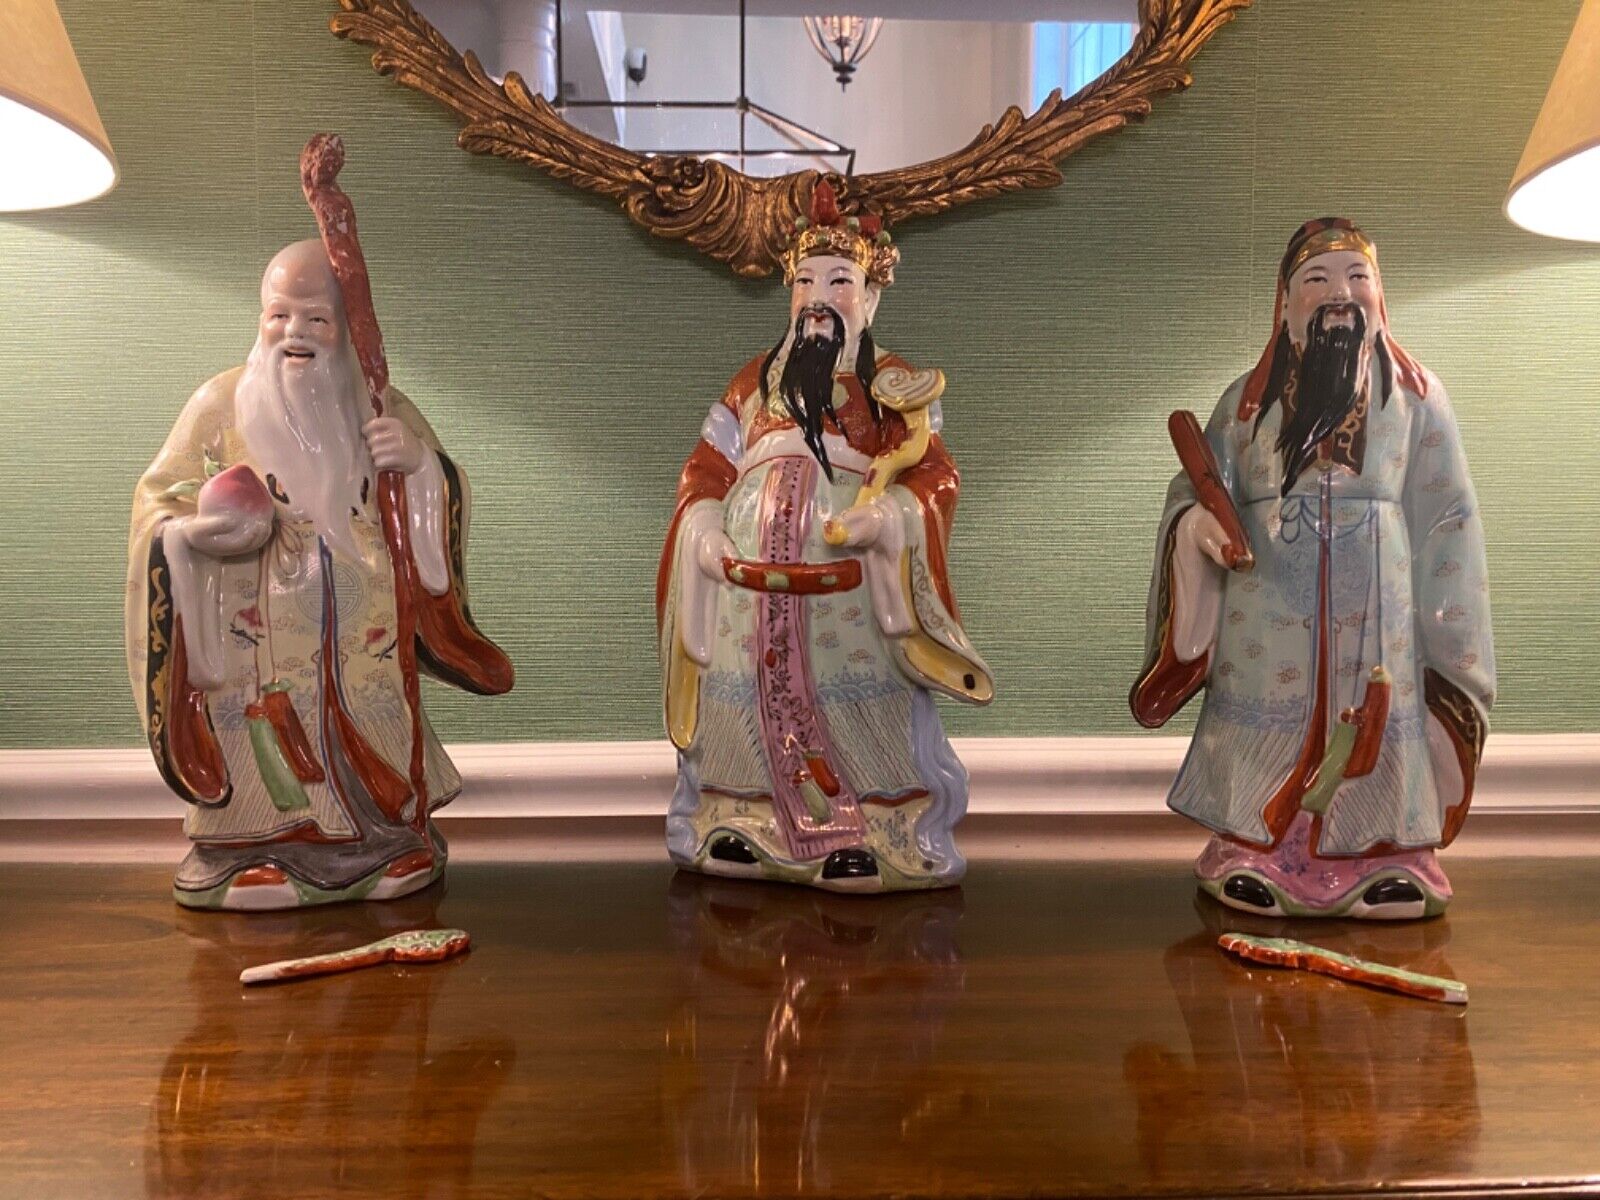  Chinese Sanxing Gods Porcelain Figurines Three Wise Old Men (roughly 14 inches)